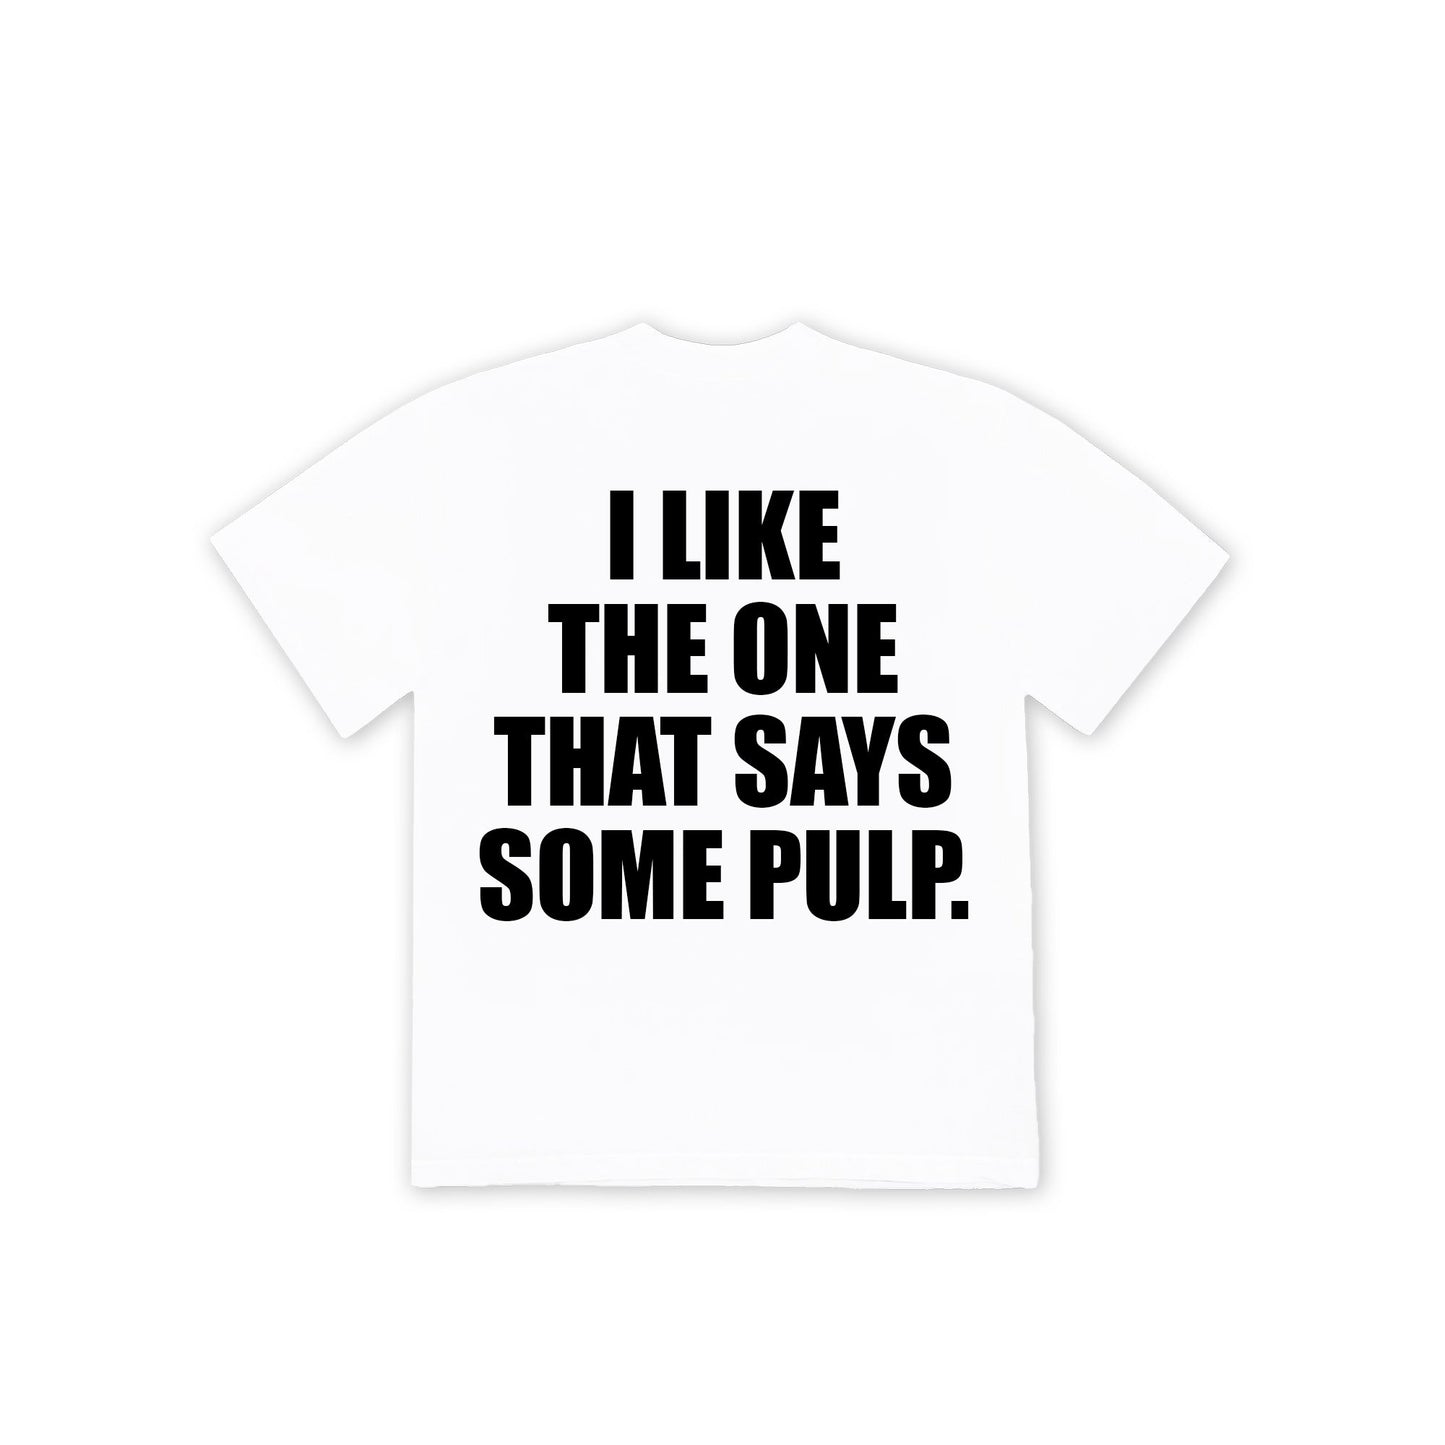 EARLY ACCESS: UNCIVILIZED "SOME PULP" T-SHIRT